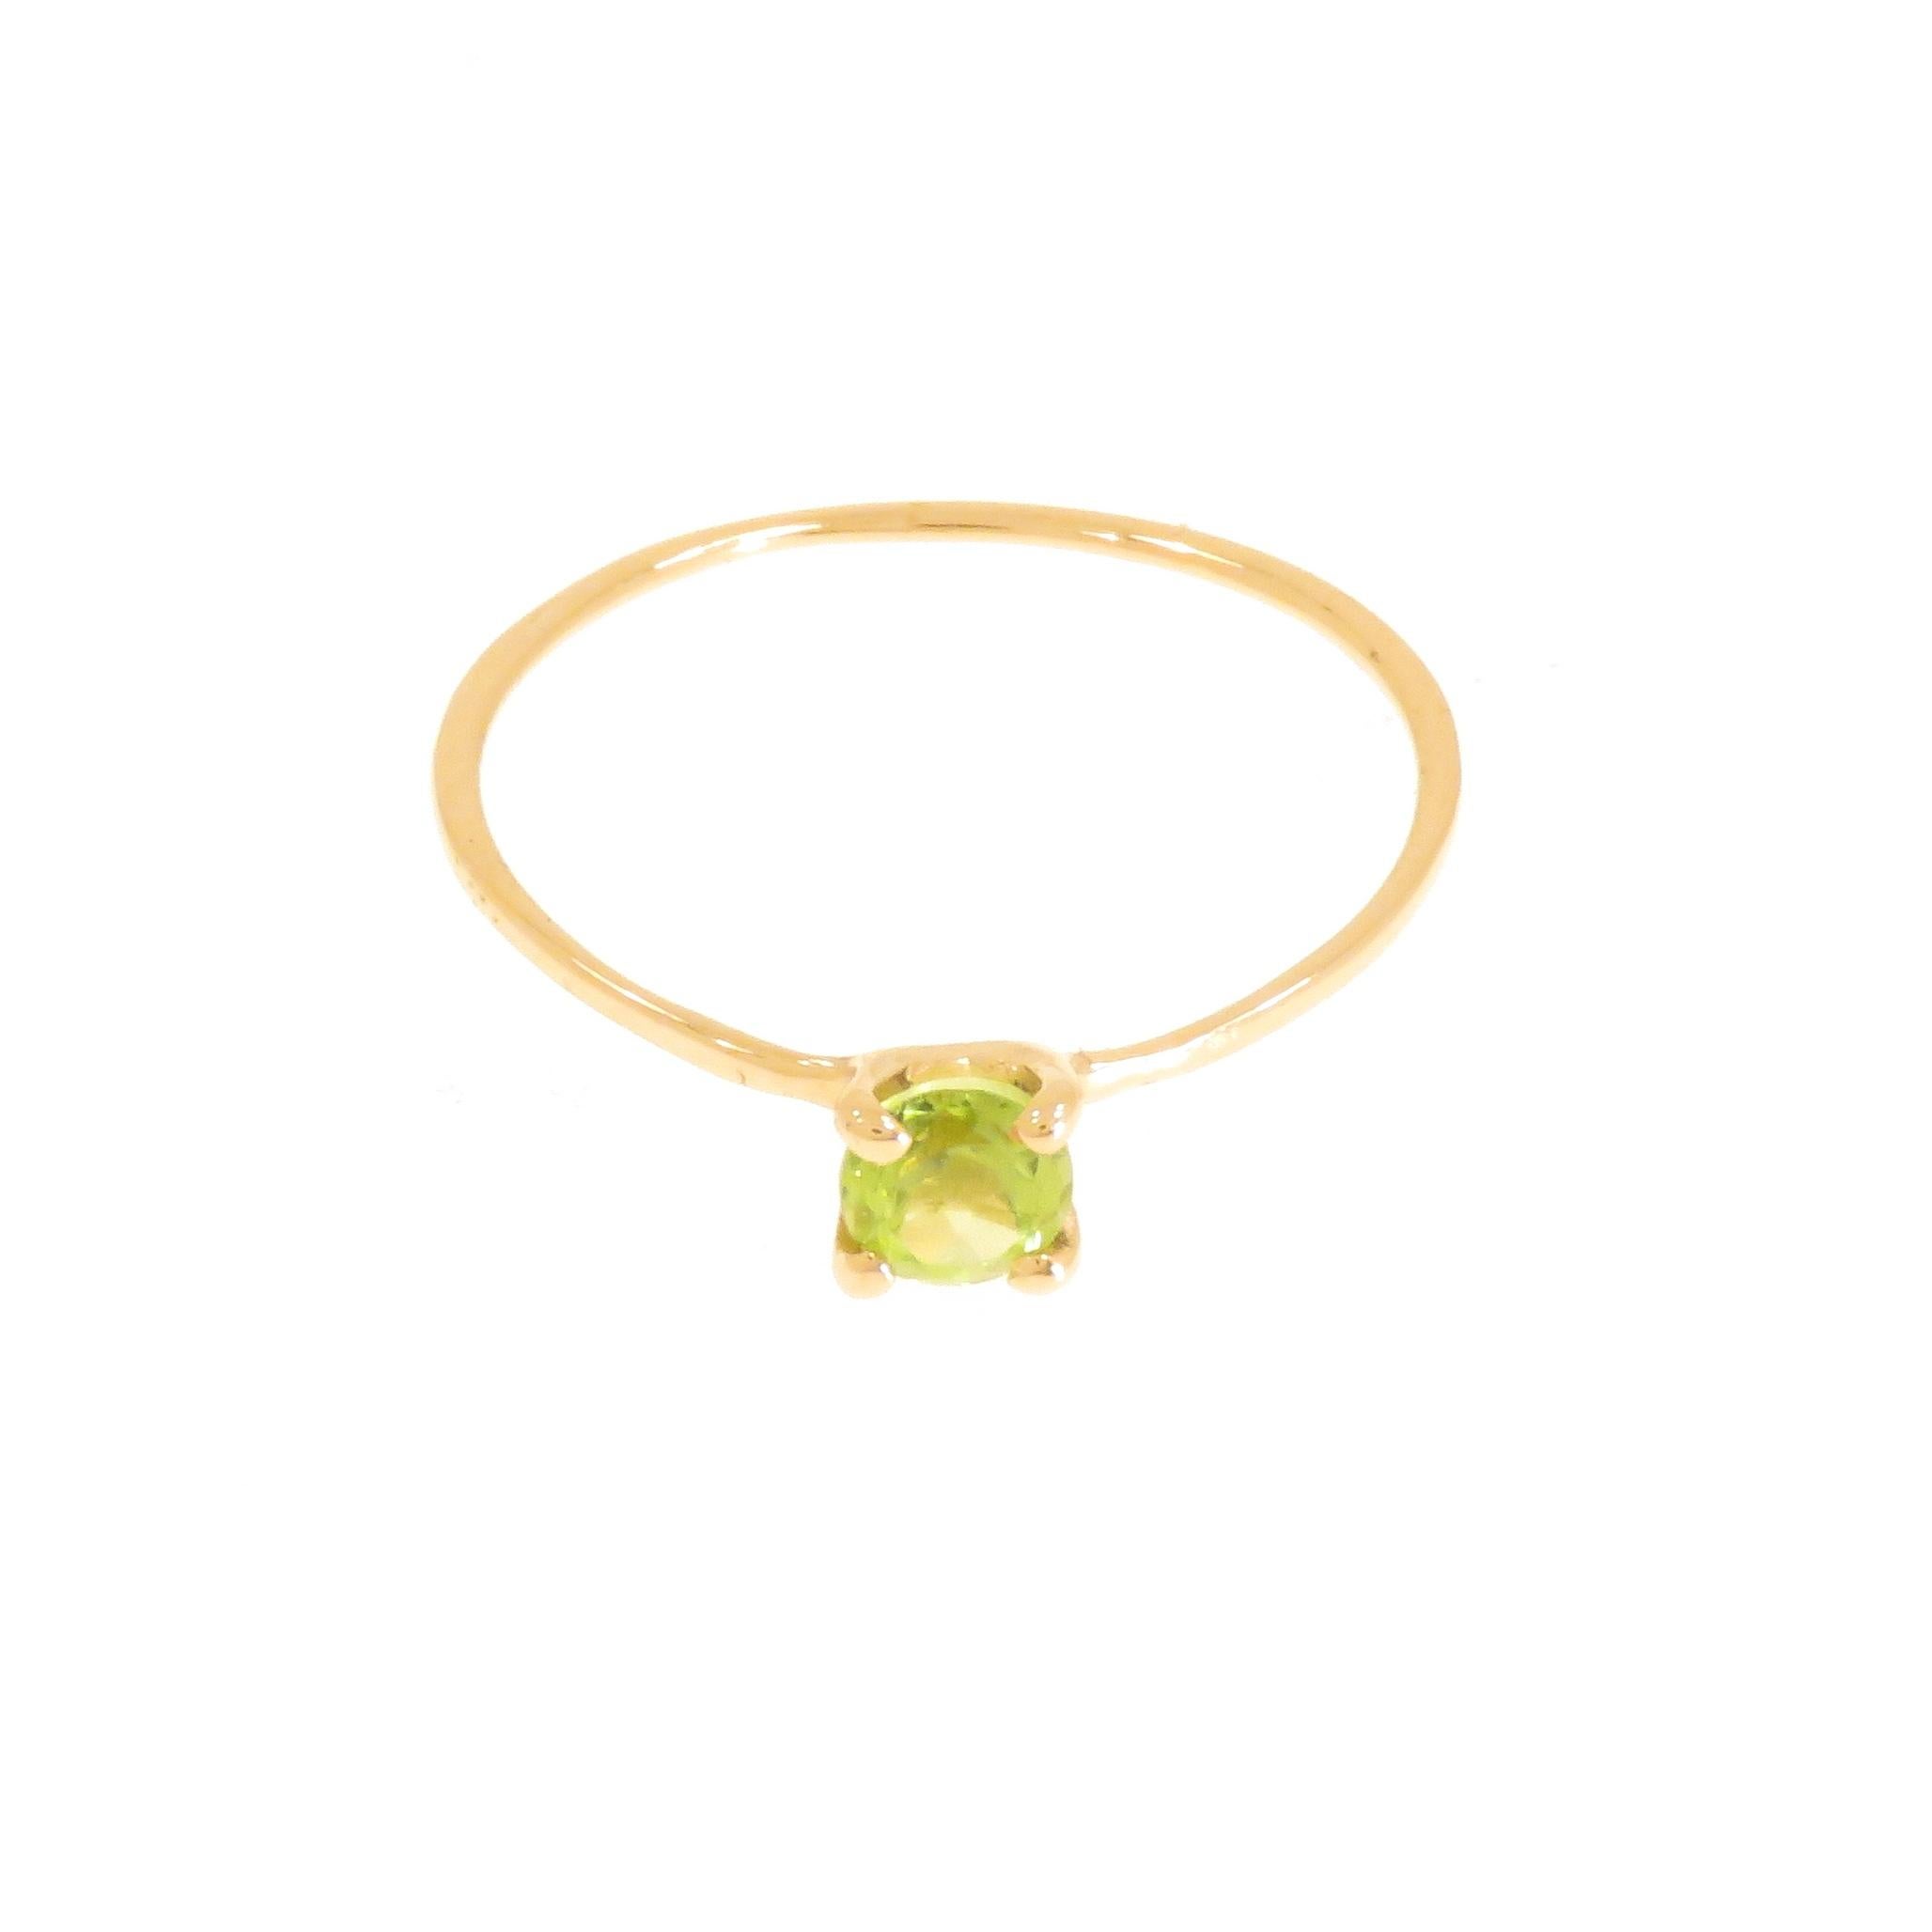 Stacking ring handmade in 9 carat rose gold with brilliant cut peridot, diameter 0.157 inches. Finger size: US size 6, Italian size 12, UK size M 1/2, French size 52. The ring can be re-sized to the customer's size before shipping. Total weight: 0.6